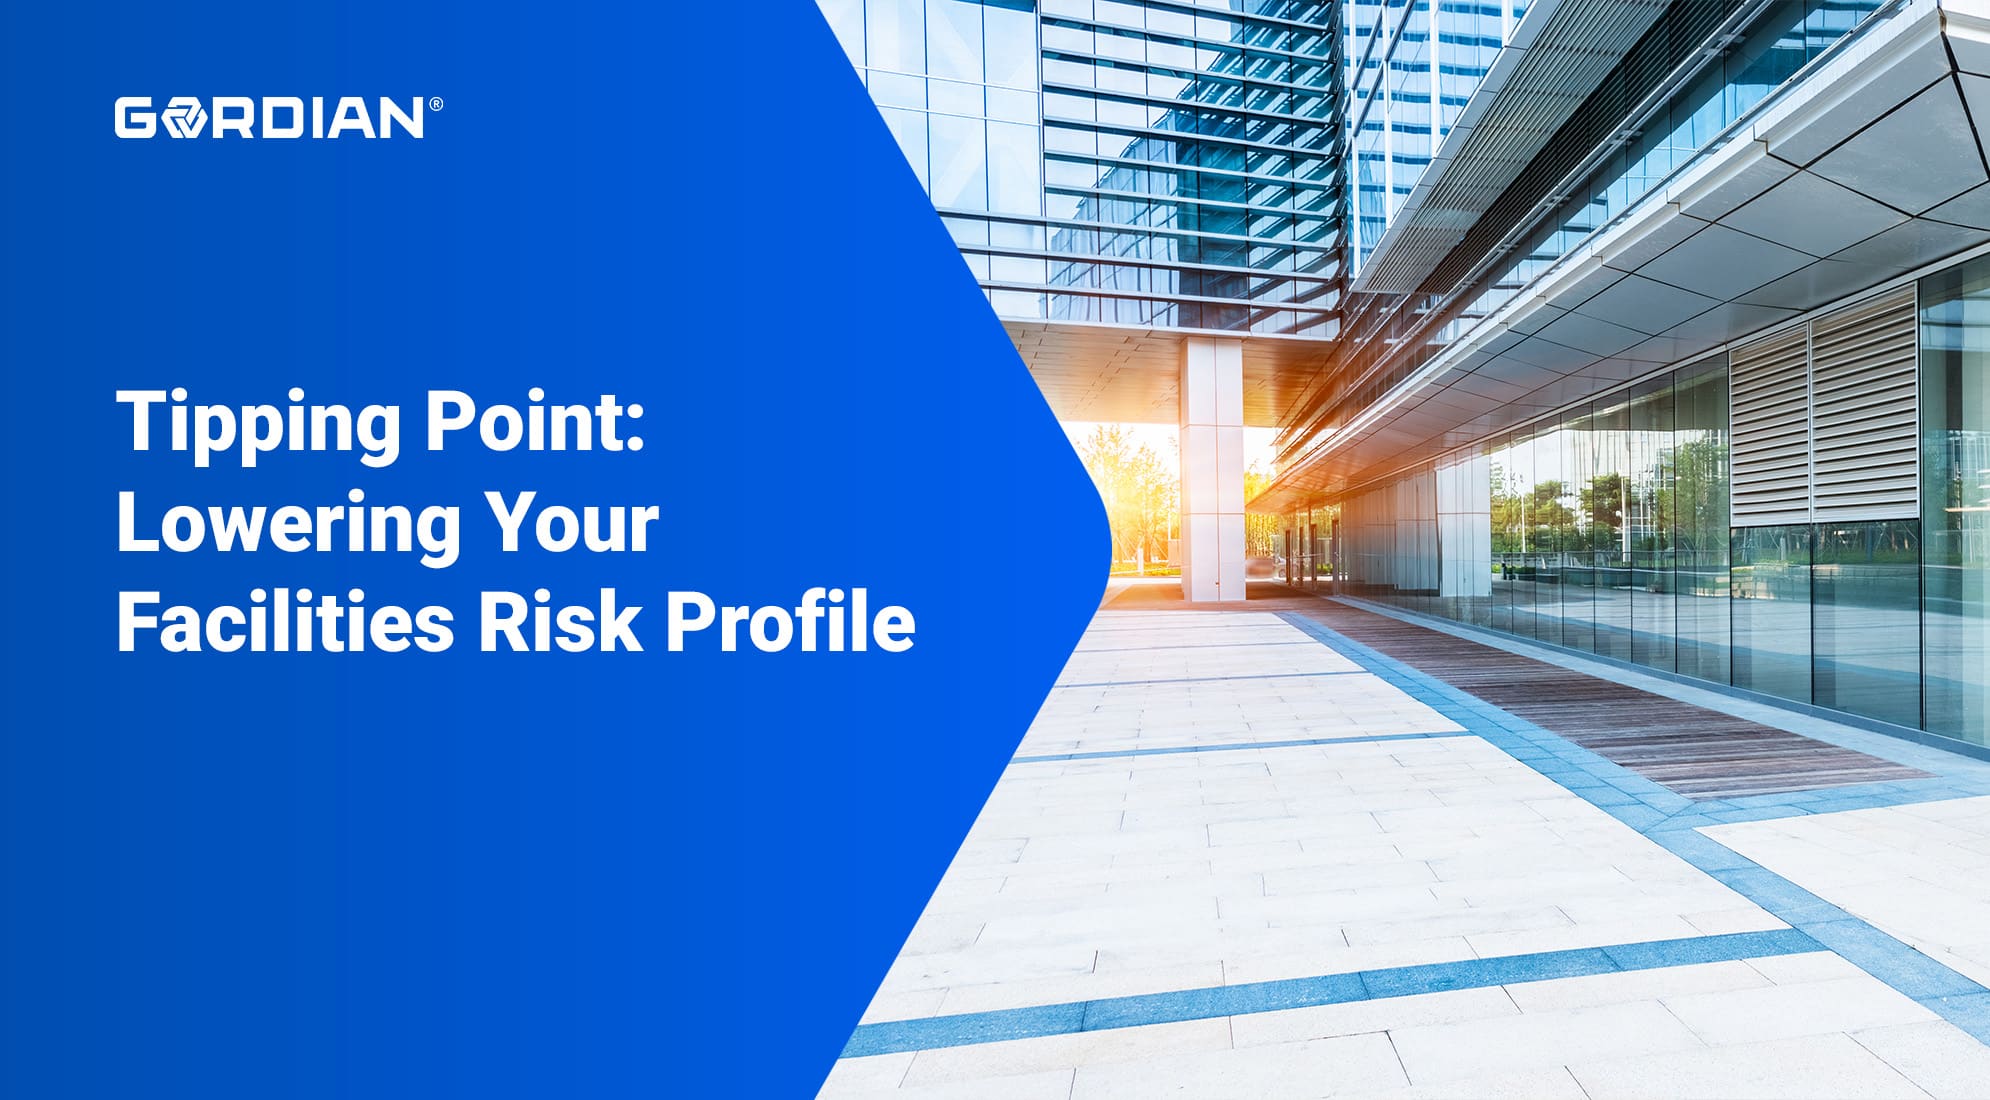 Tipping Point: Lowering Your Facilities Risk Profile 4